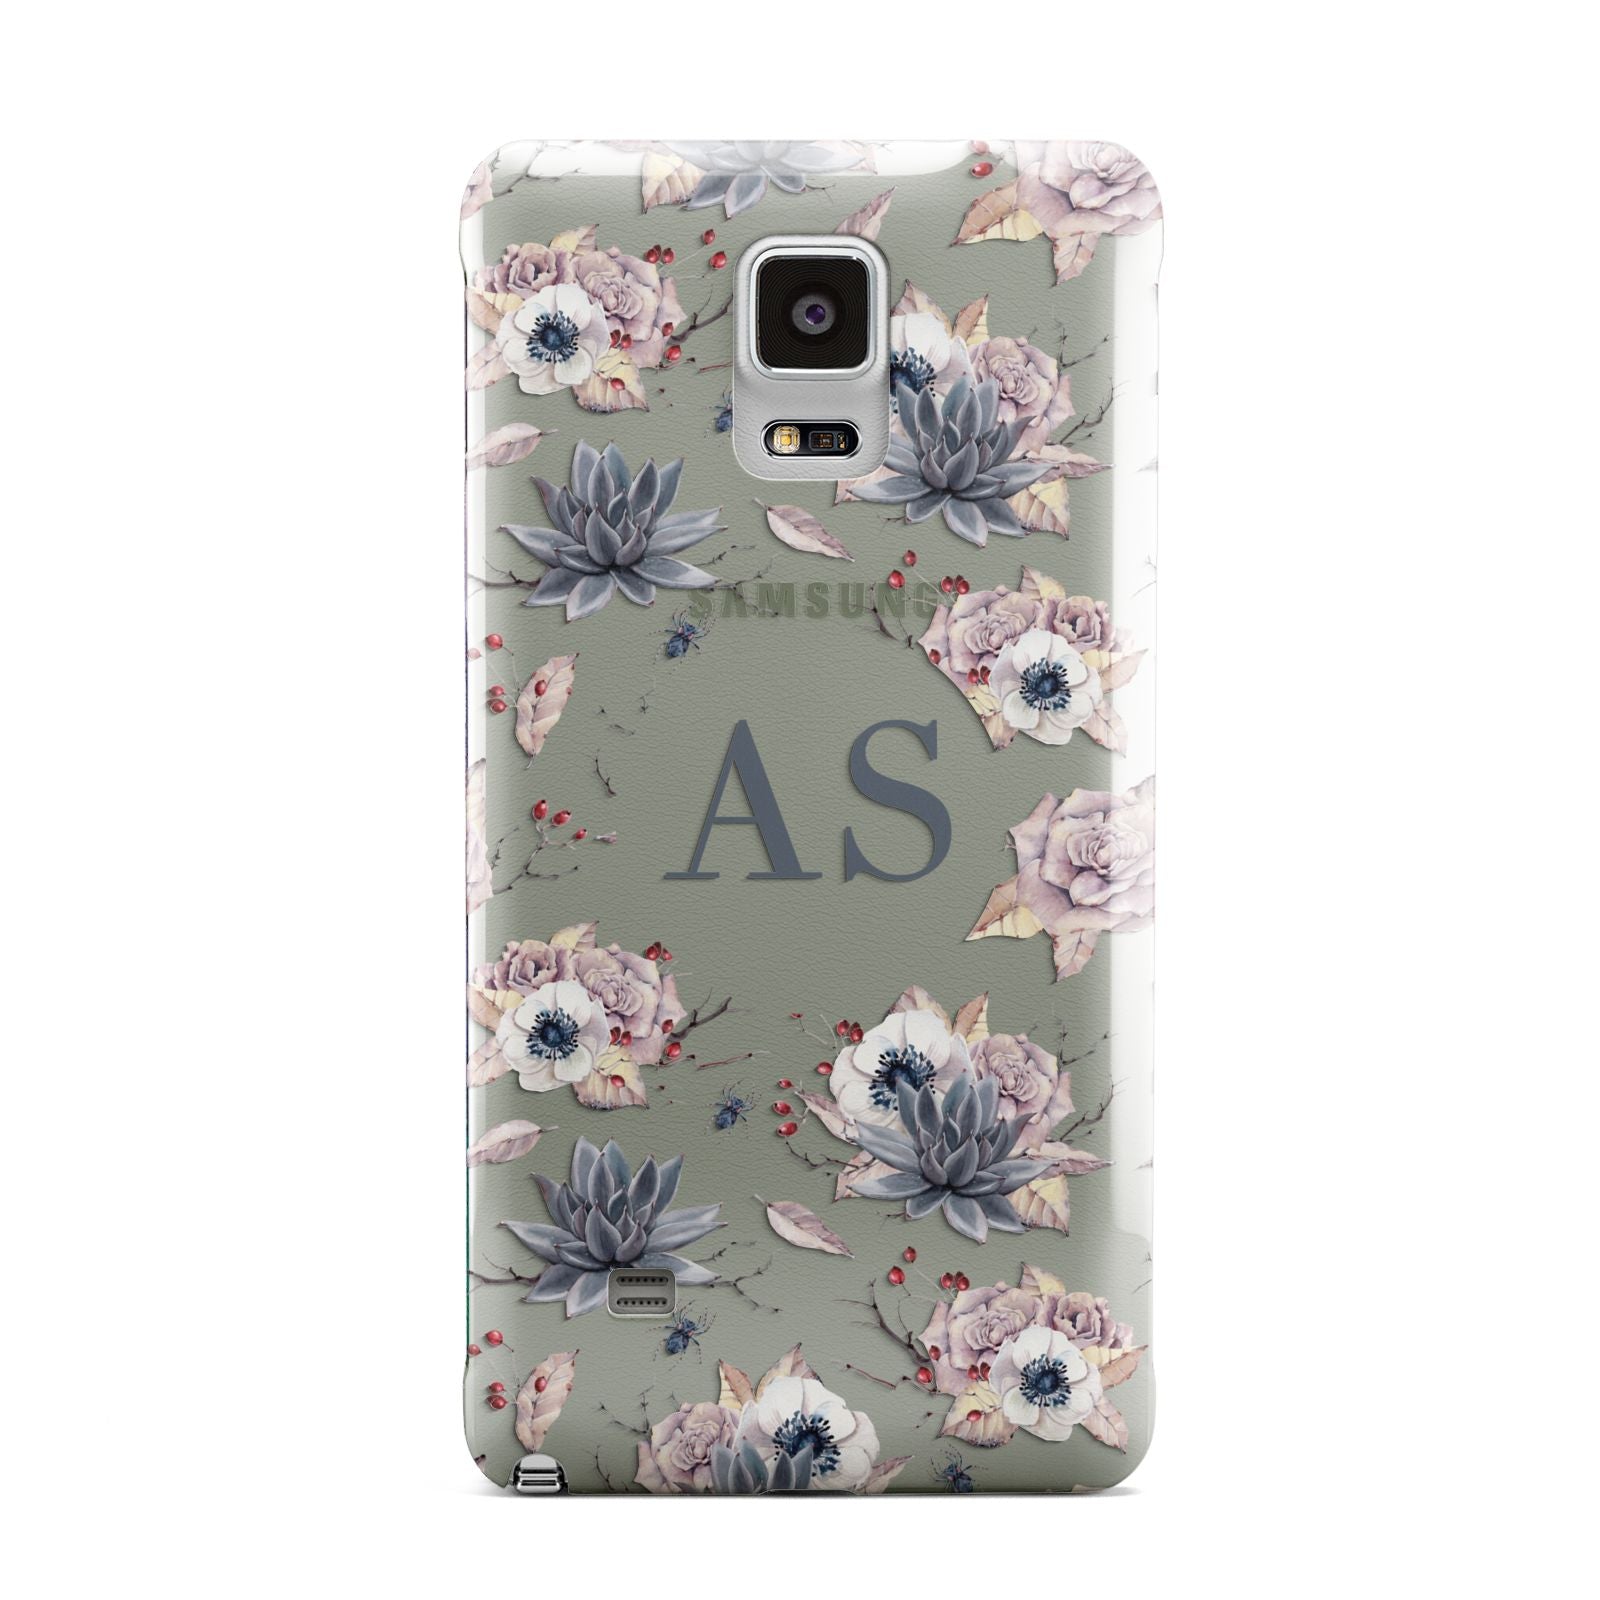 Personalised Halloween Floral Samsung Galaxy Note 4 Case